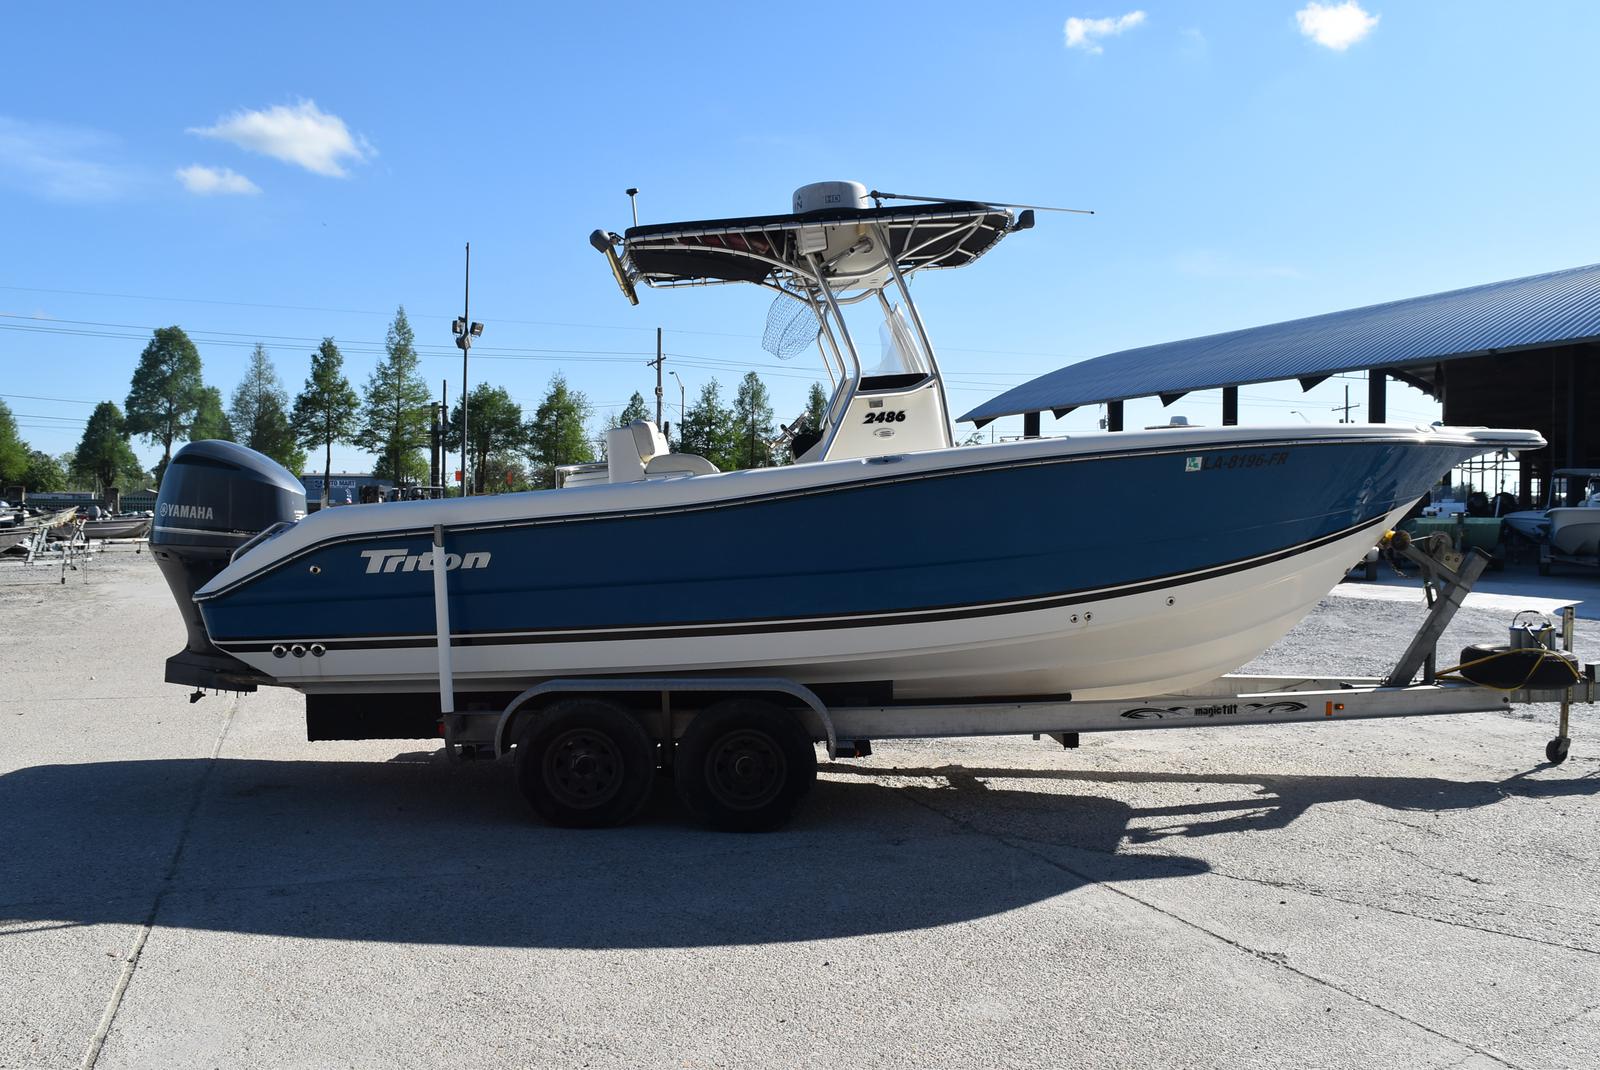 2006 Triton boat for sale, model of the boat is 2486 & Image # 14 of 24